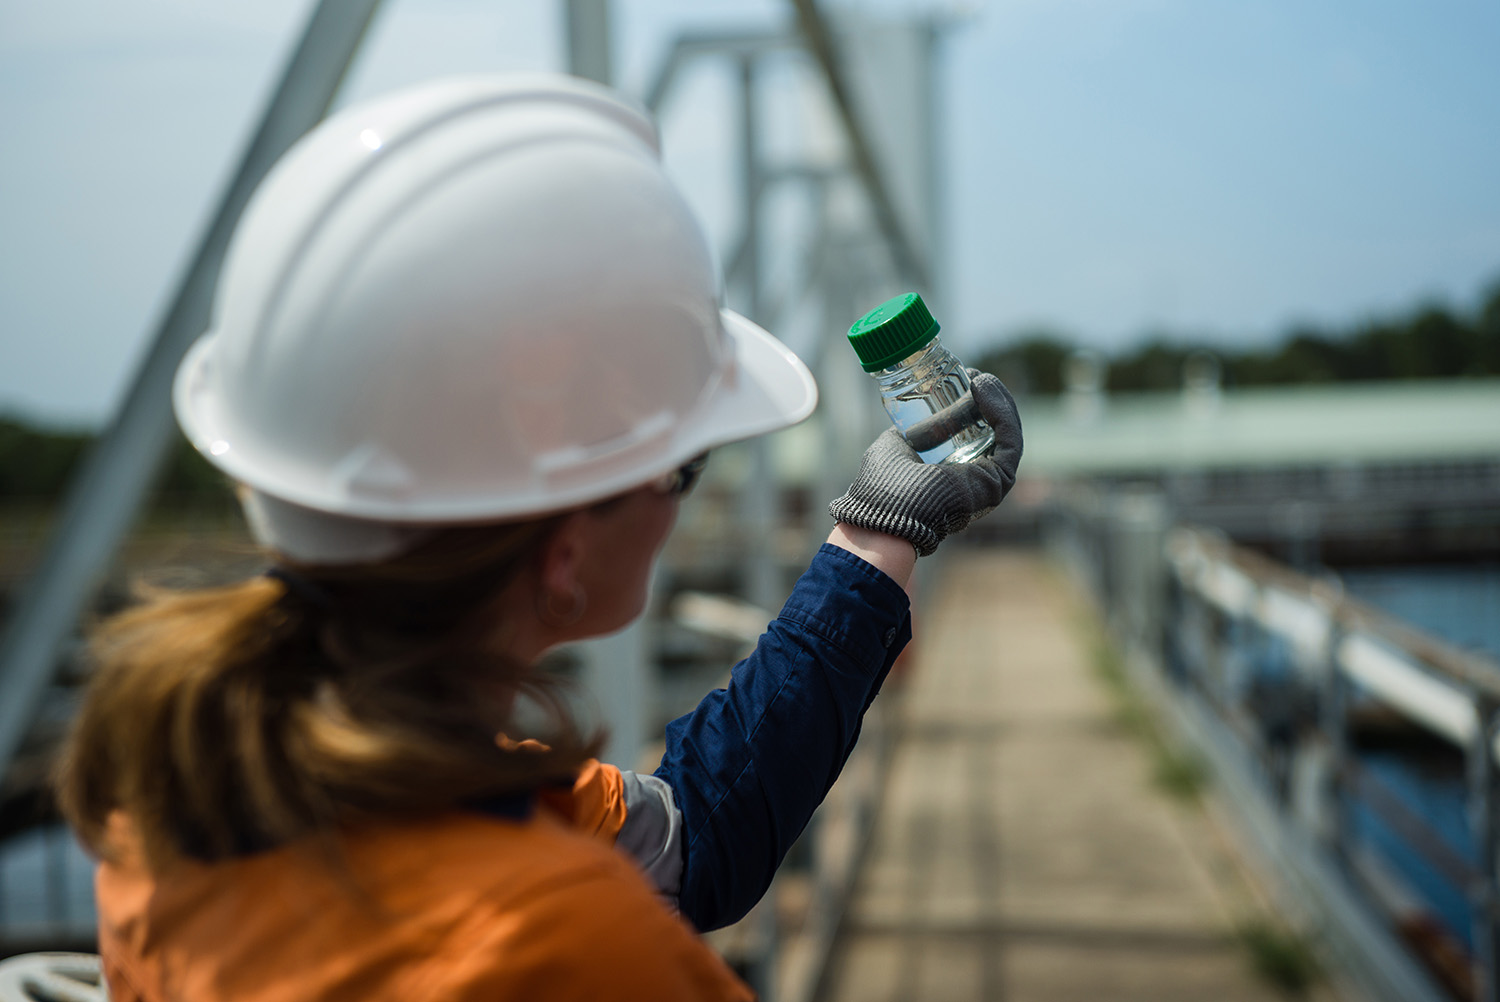 A Veolia employee holds a small vial of clear water up to inspect quality